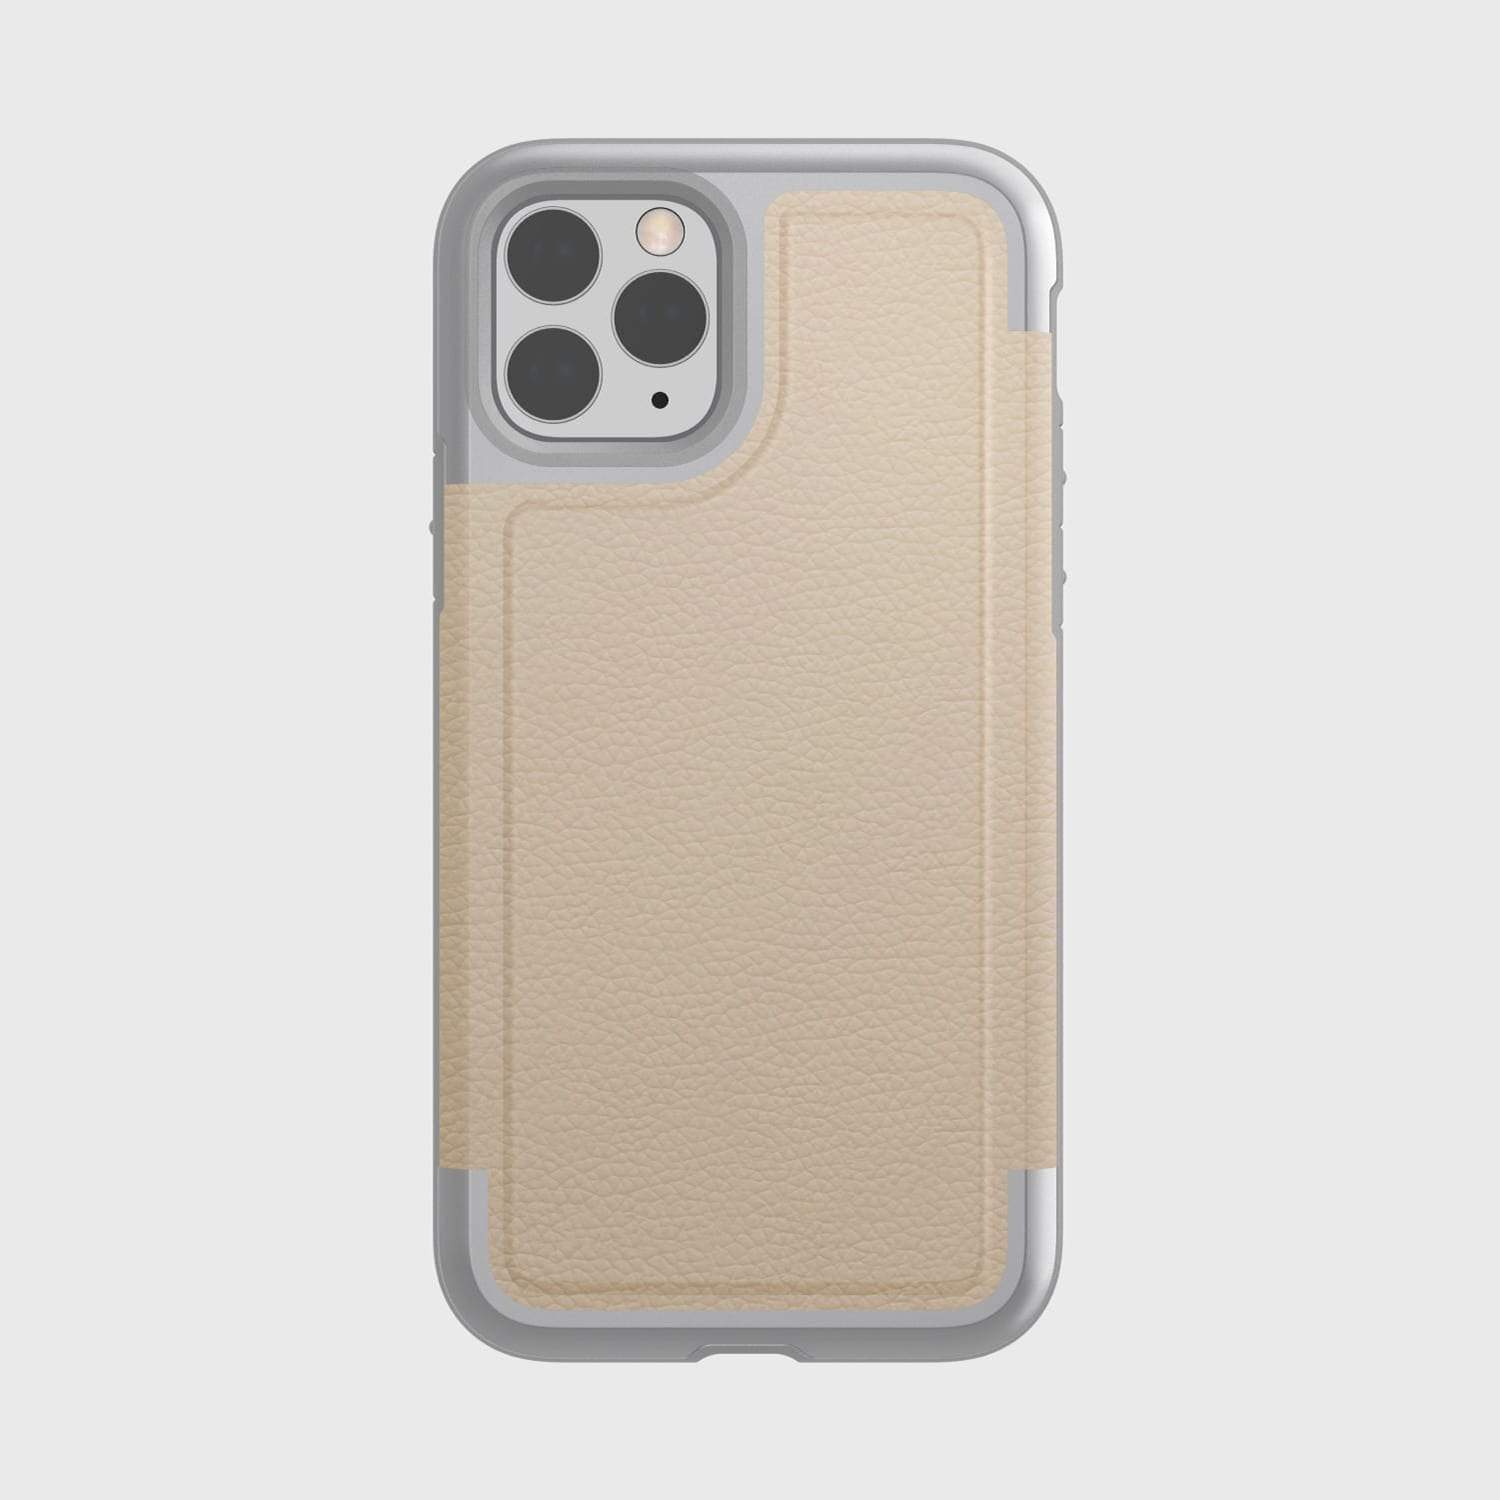 A beige leather case for the Raptic iPhone 11 Pro Case - Prime with protective features.